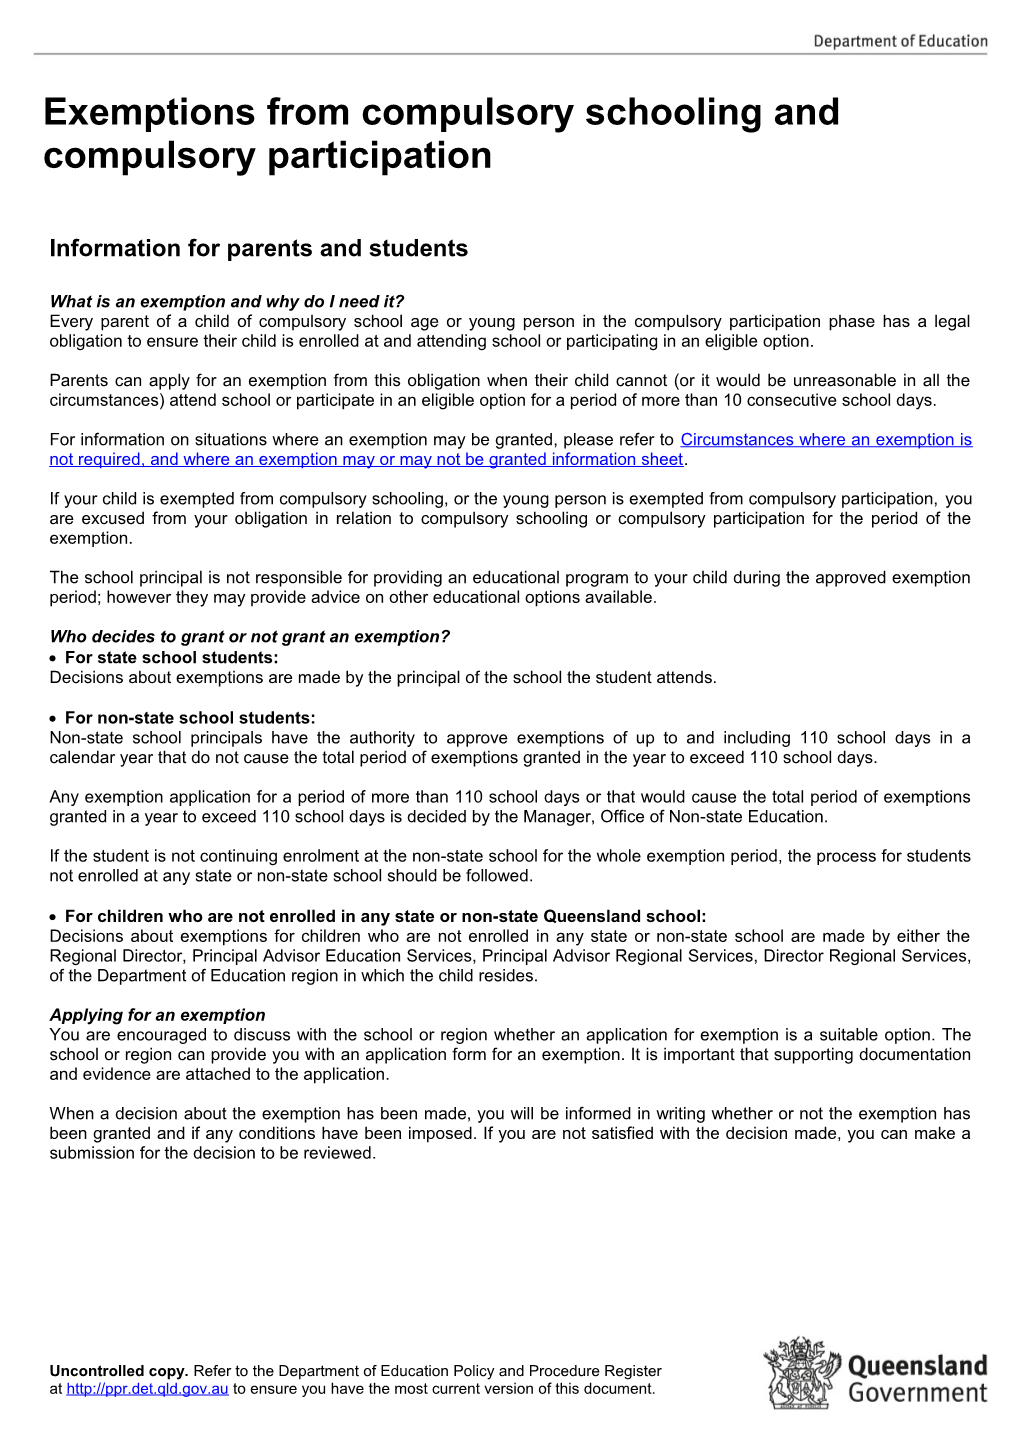 Information Sheet Exemptions from Compulsory Schooling and Compulsory Participation